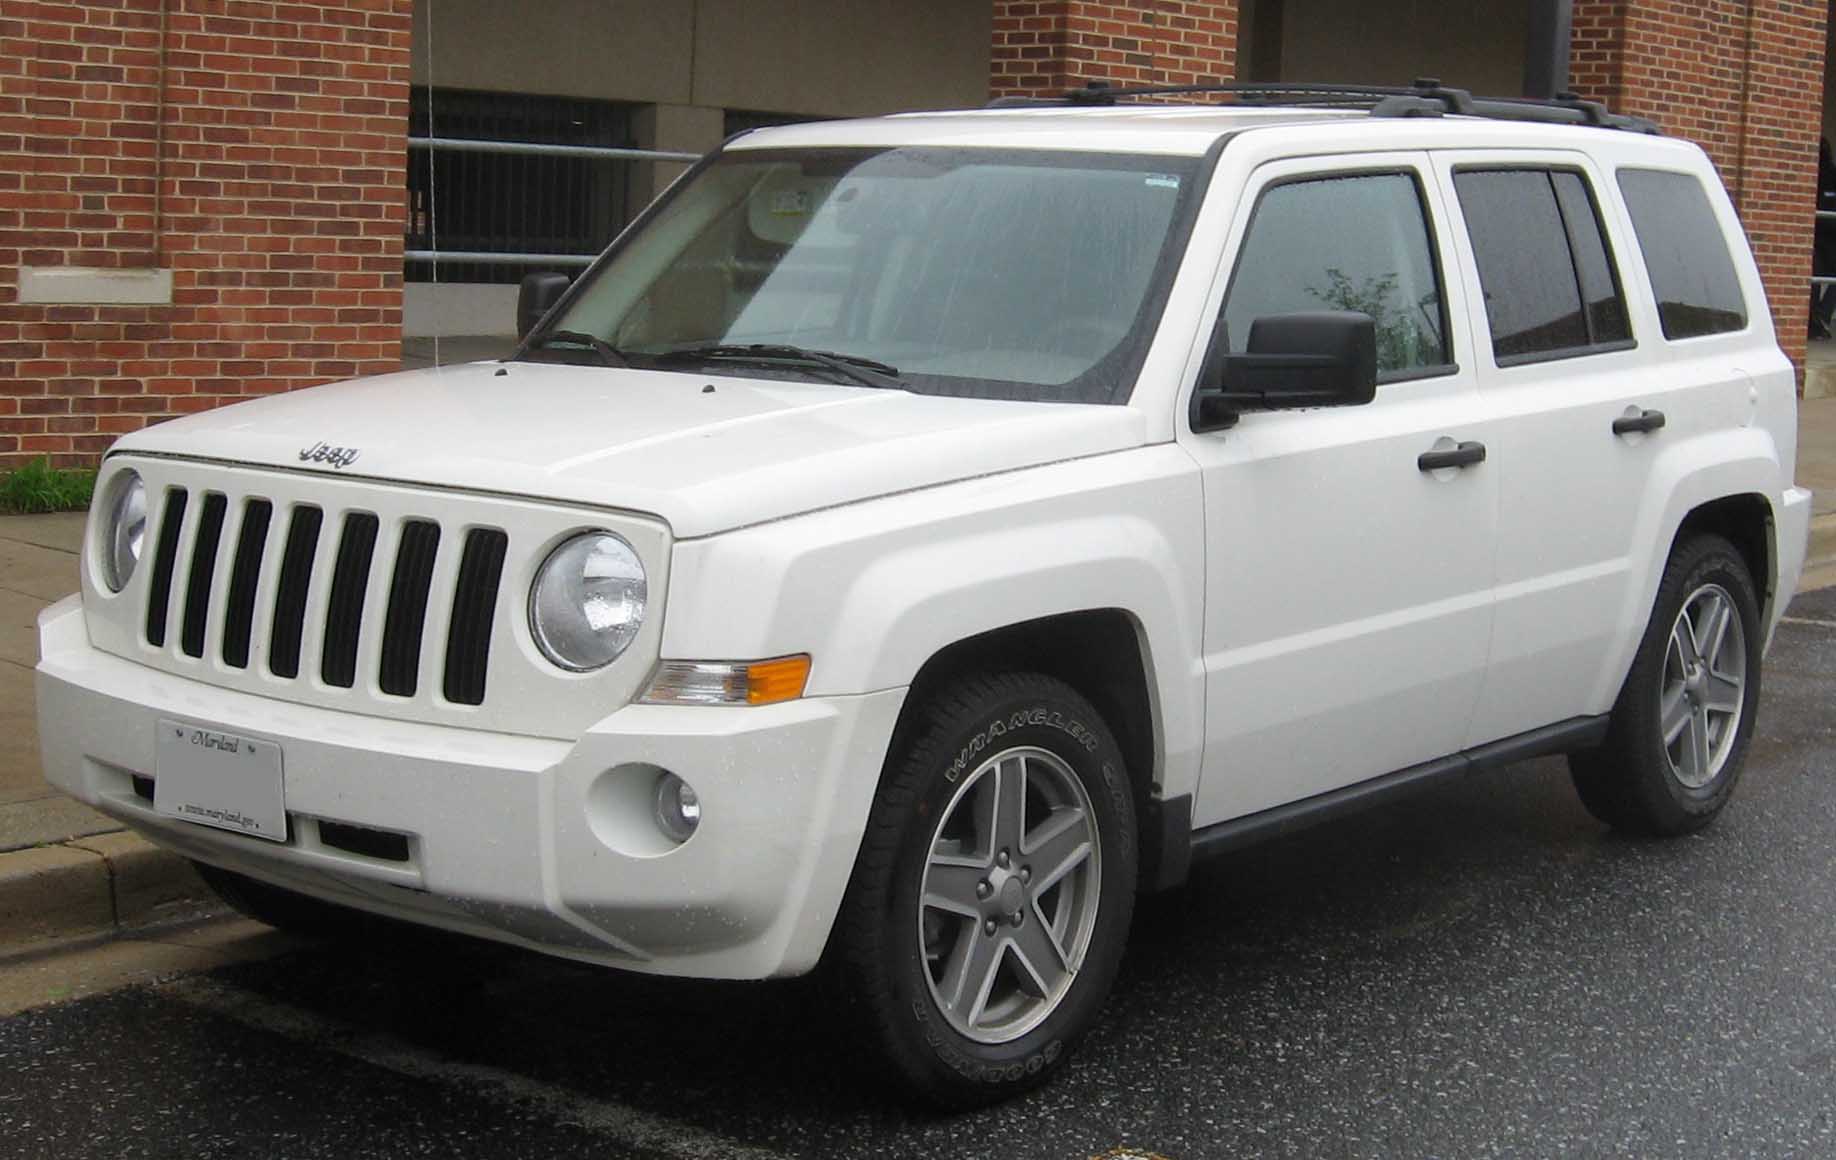 The first-generation Jeep Patriot